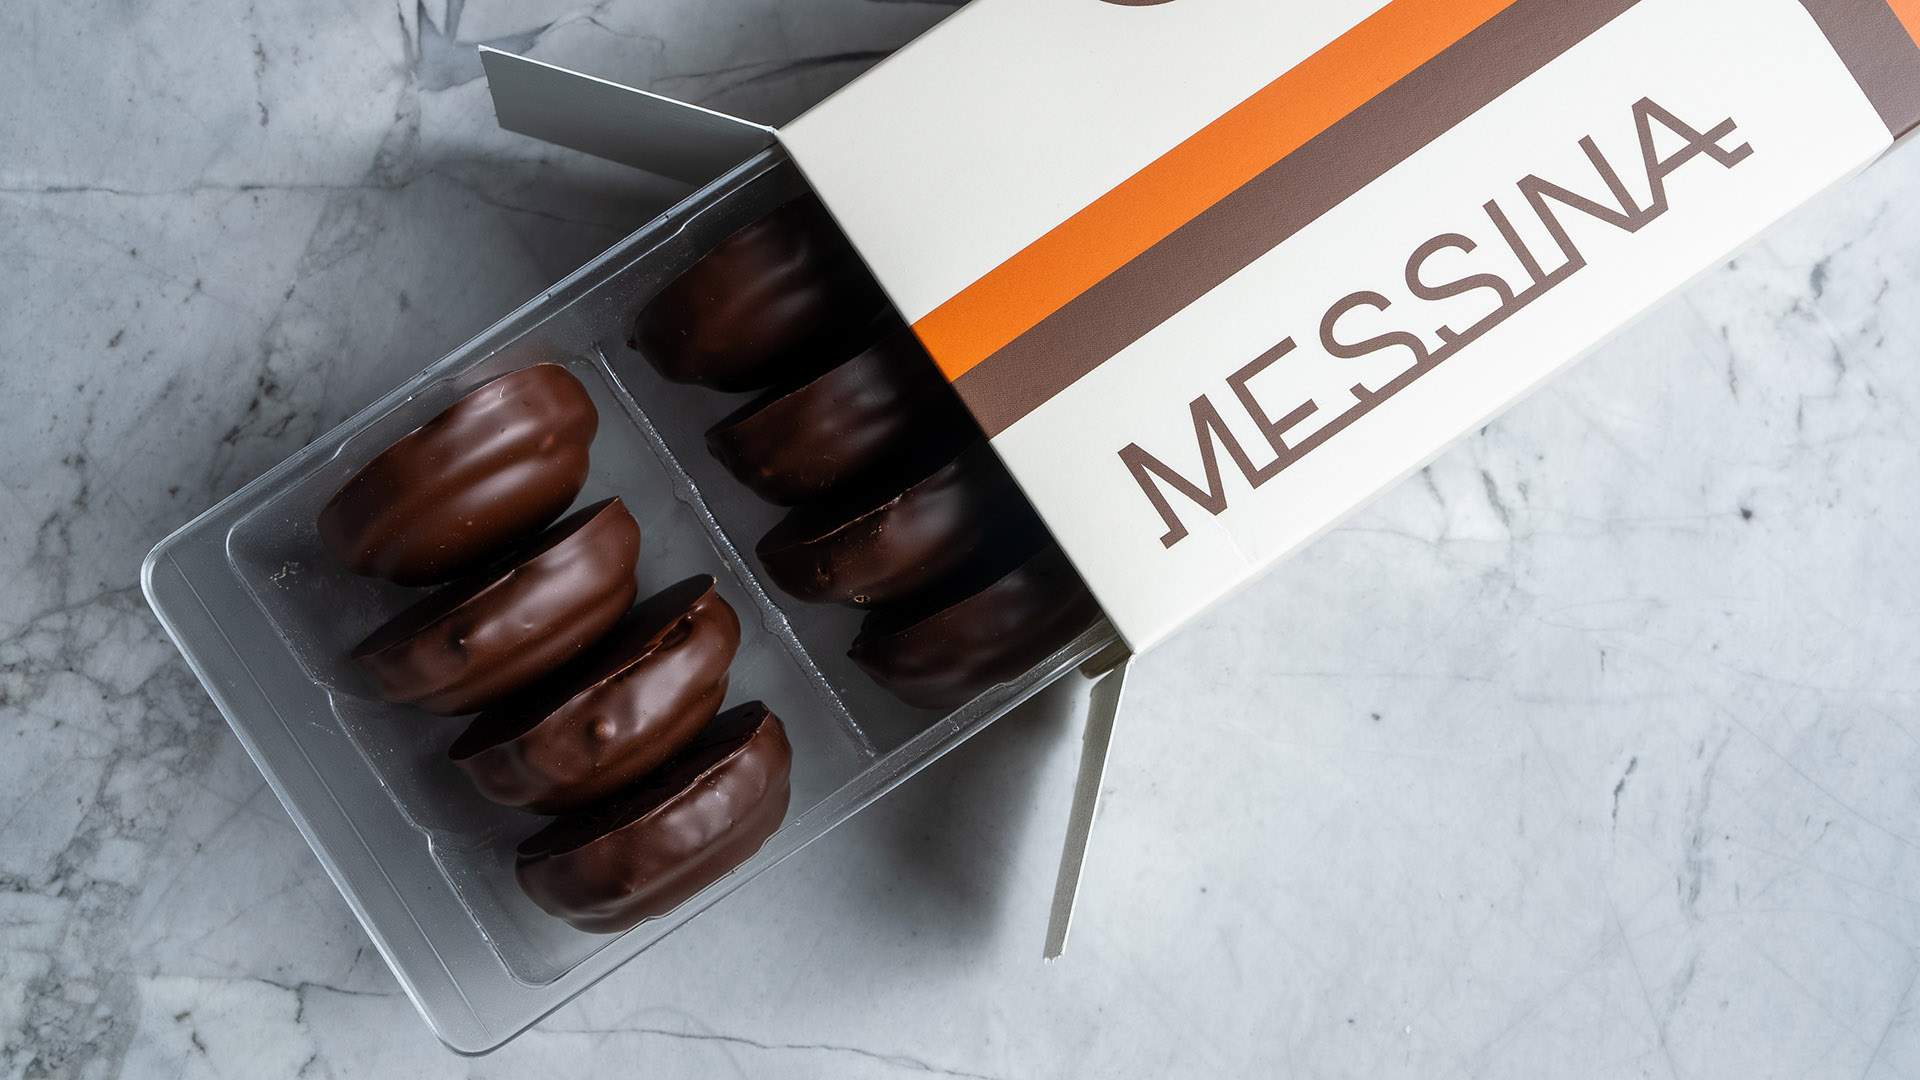 Gelato Messina Is Dropping Its Own Mint Slice Biscuits for Father's Day (or Your Own Snacks)